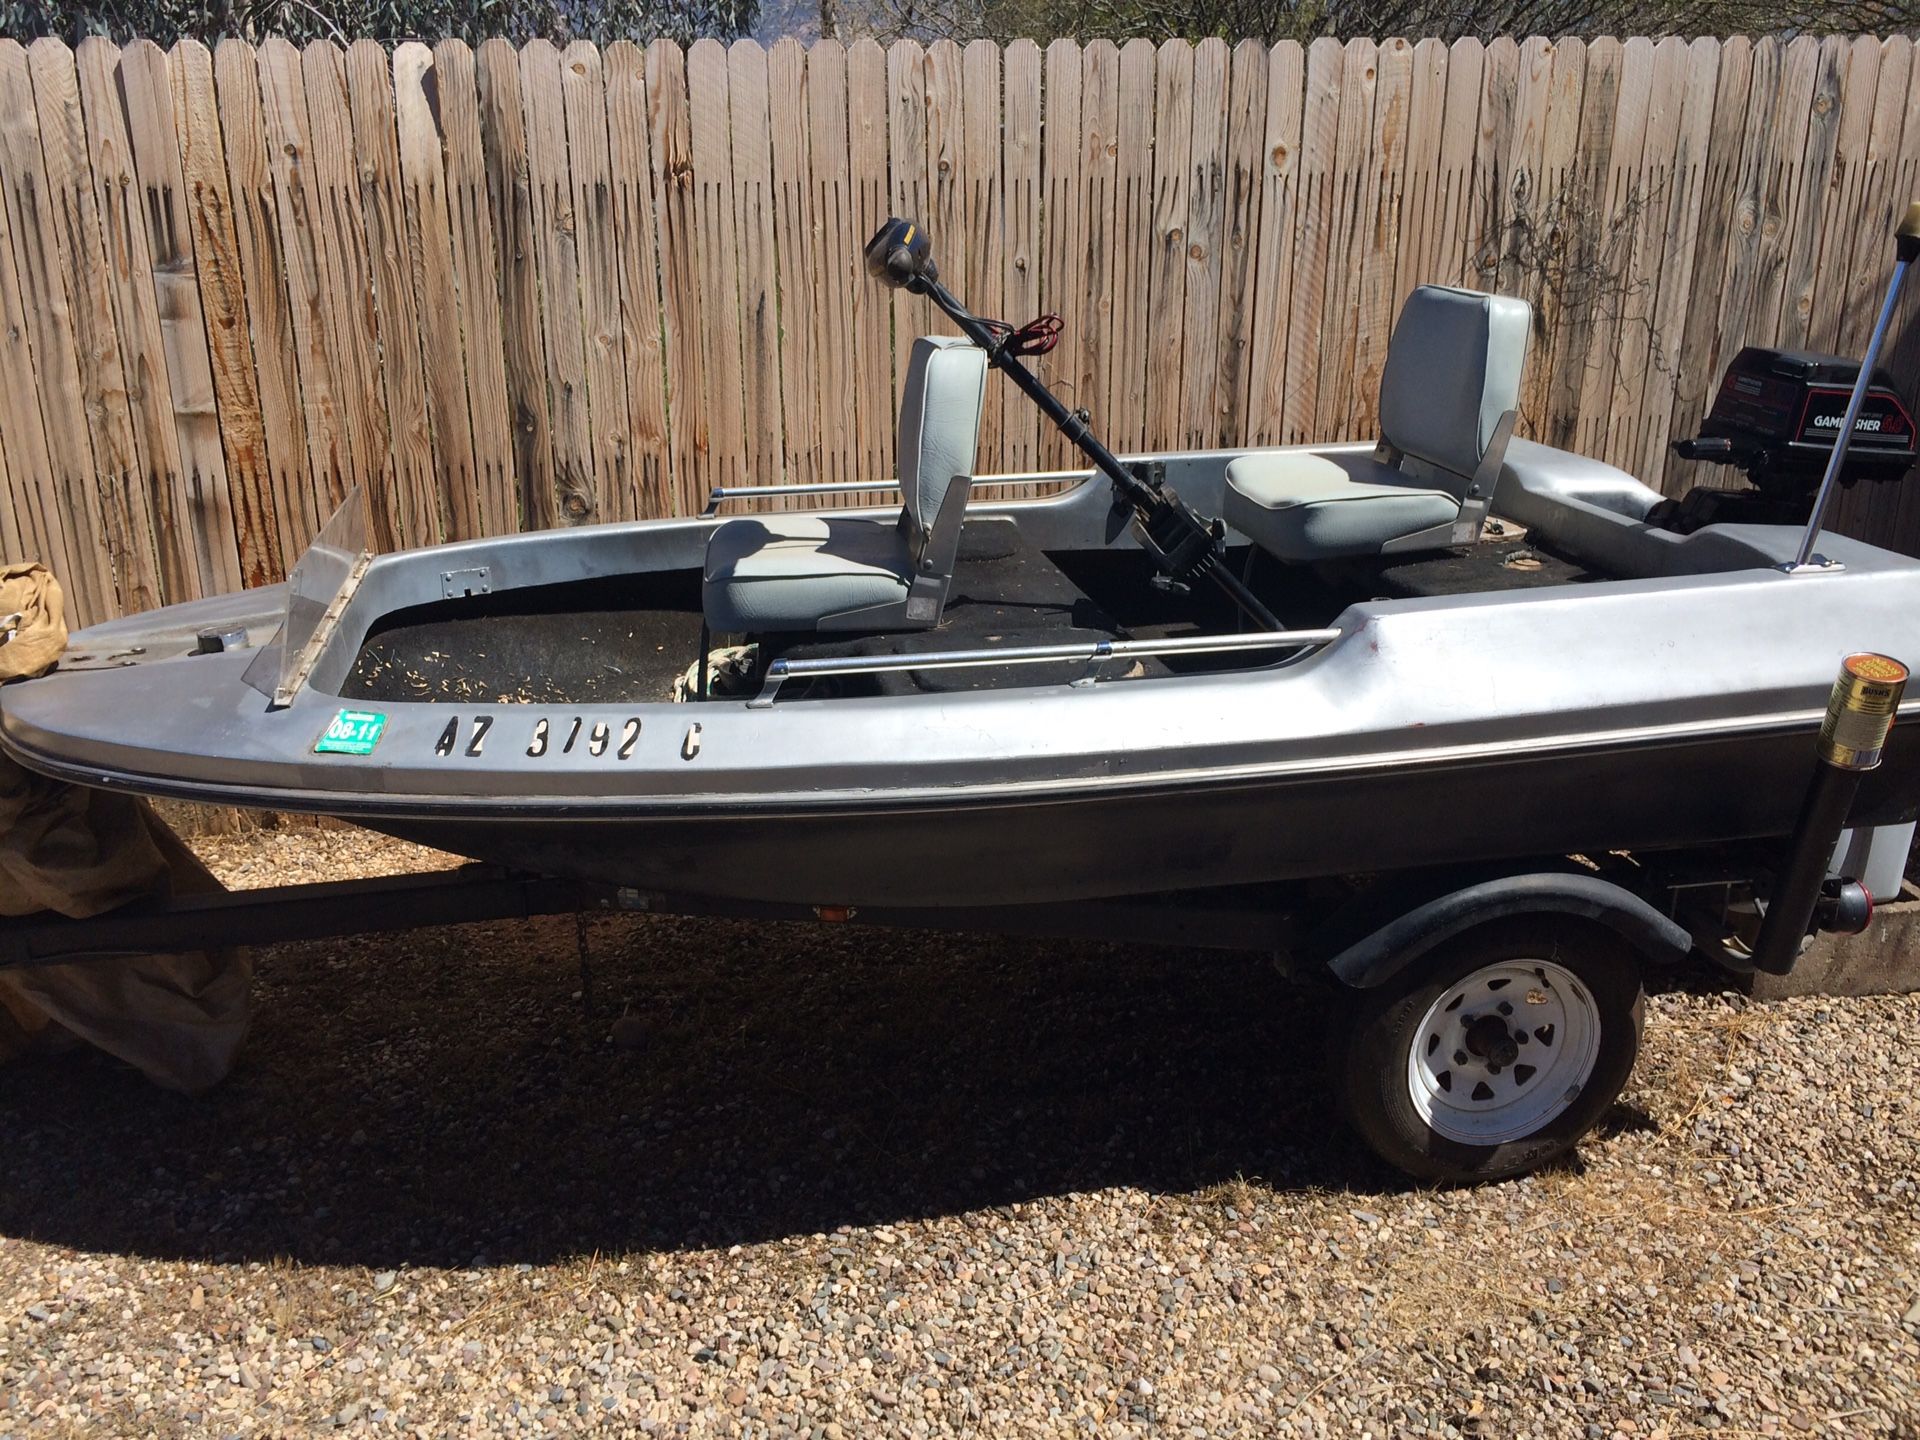 1975 10’ - 5.0 Game Fisher 2 stroke Engine. And Trolling motor